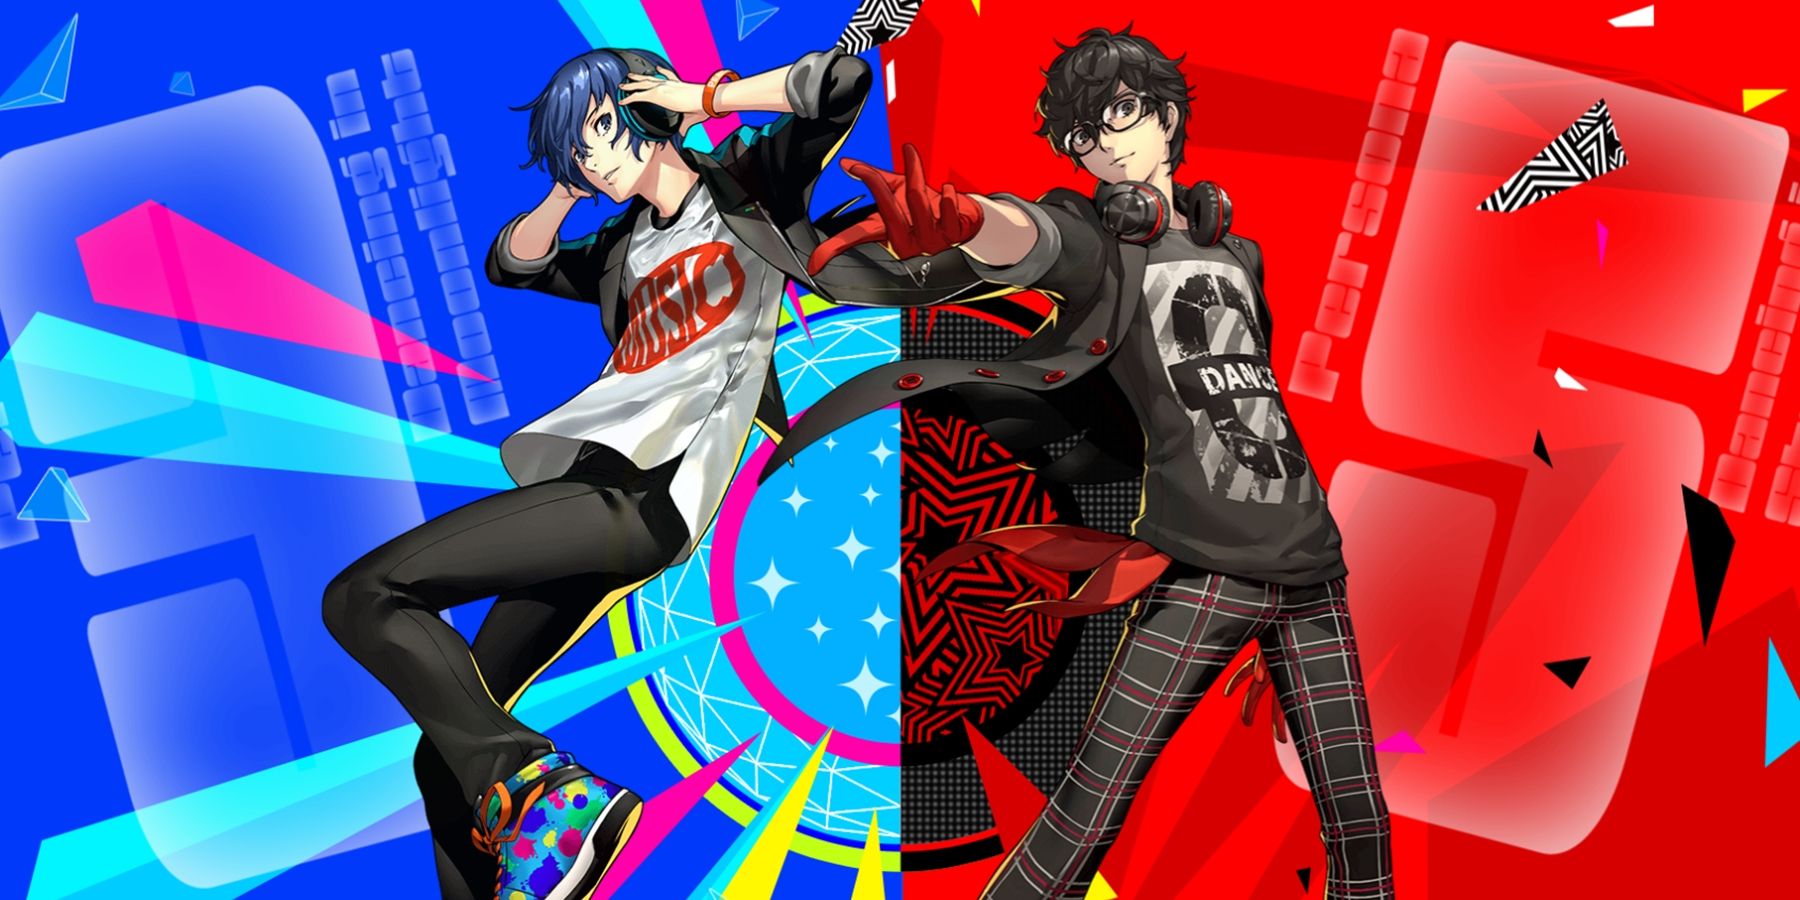 Persona Dancing Soundtrack is getting a vinyl collection - Interreviewed